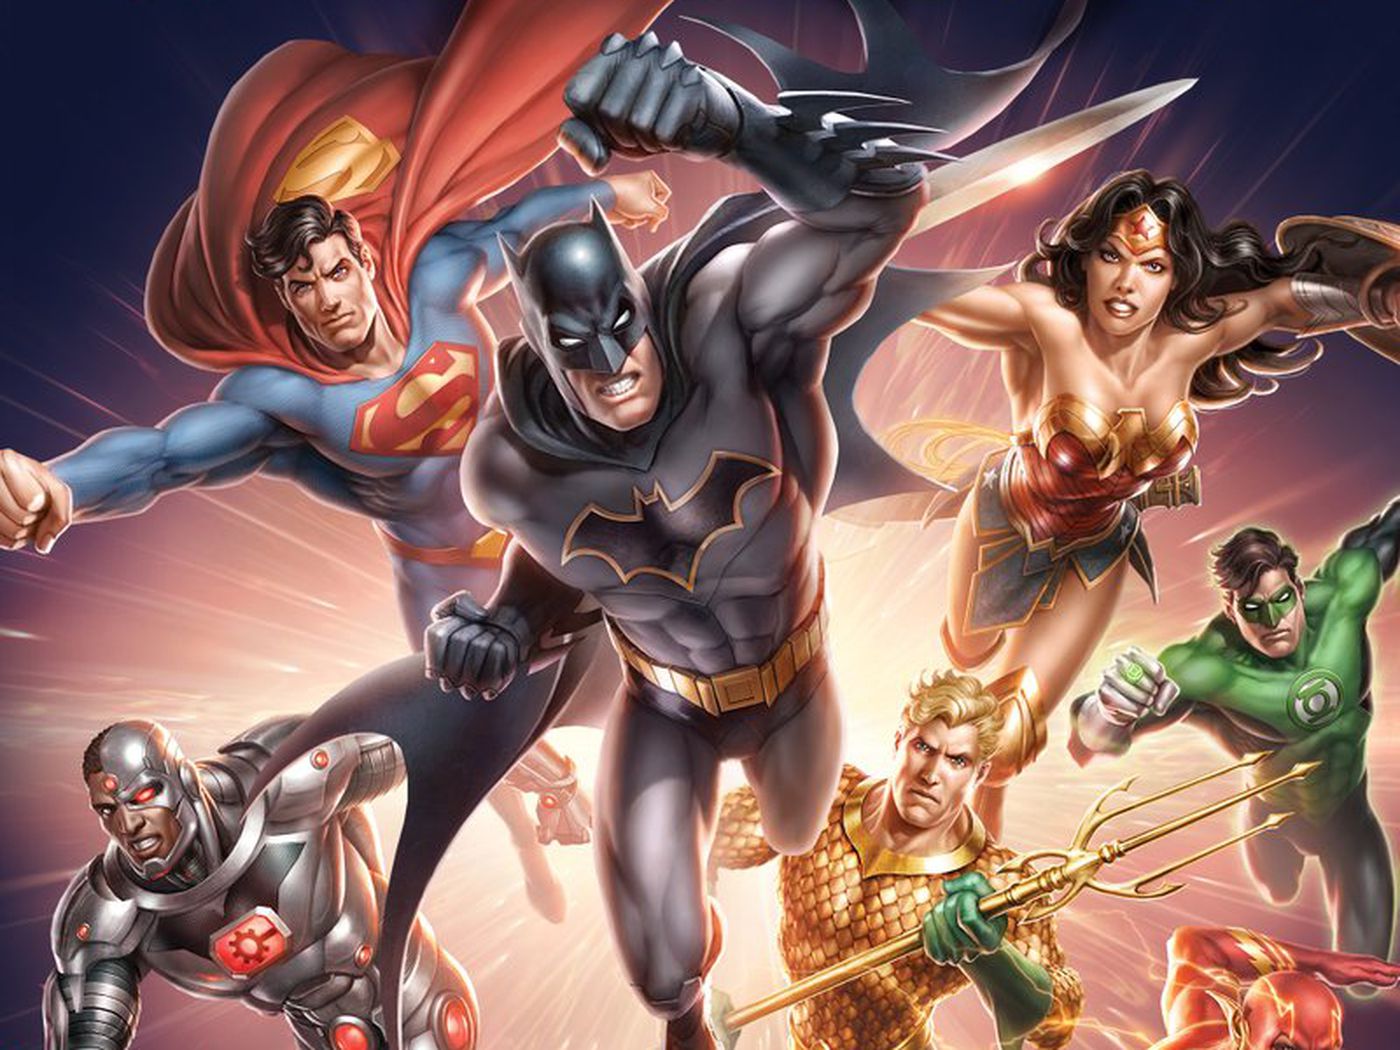 More than 30 DC Comics movies will be included in anniversary set